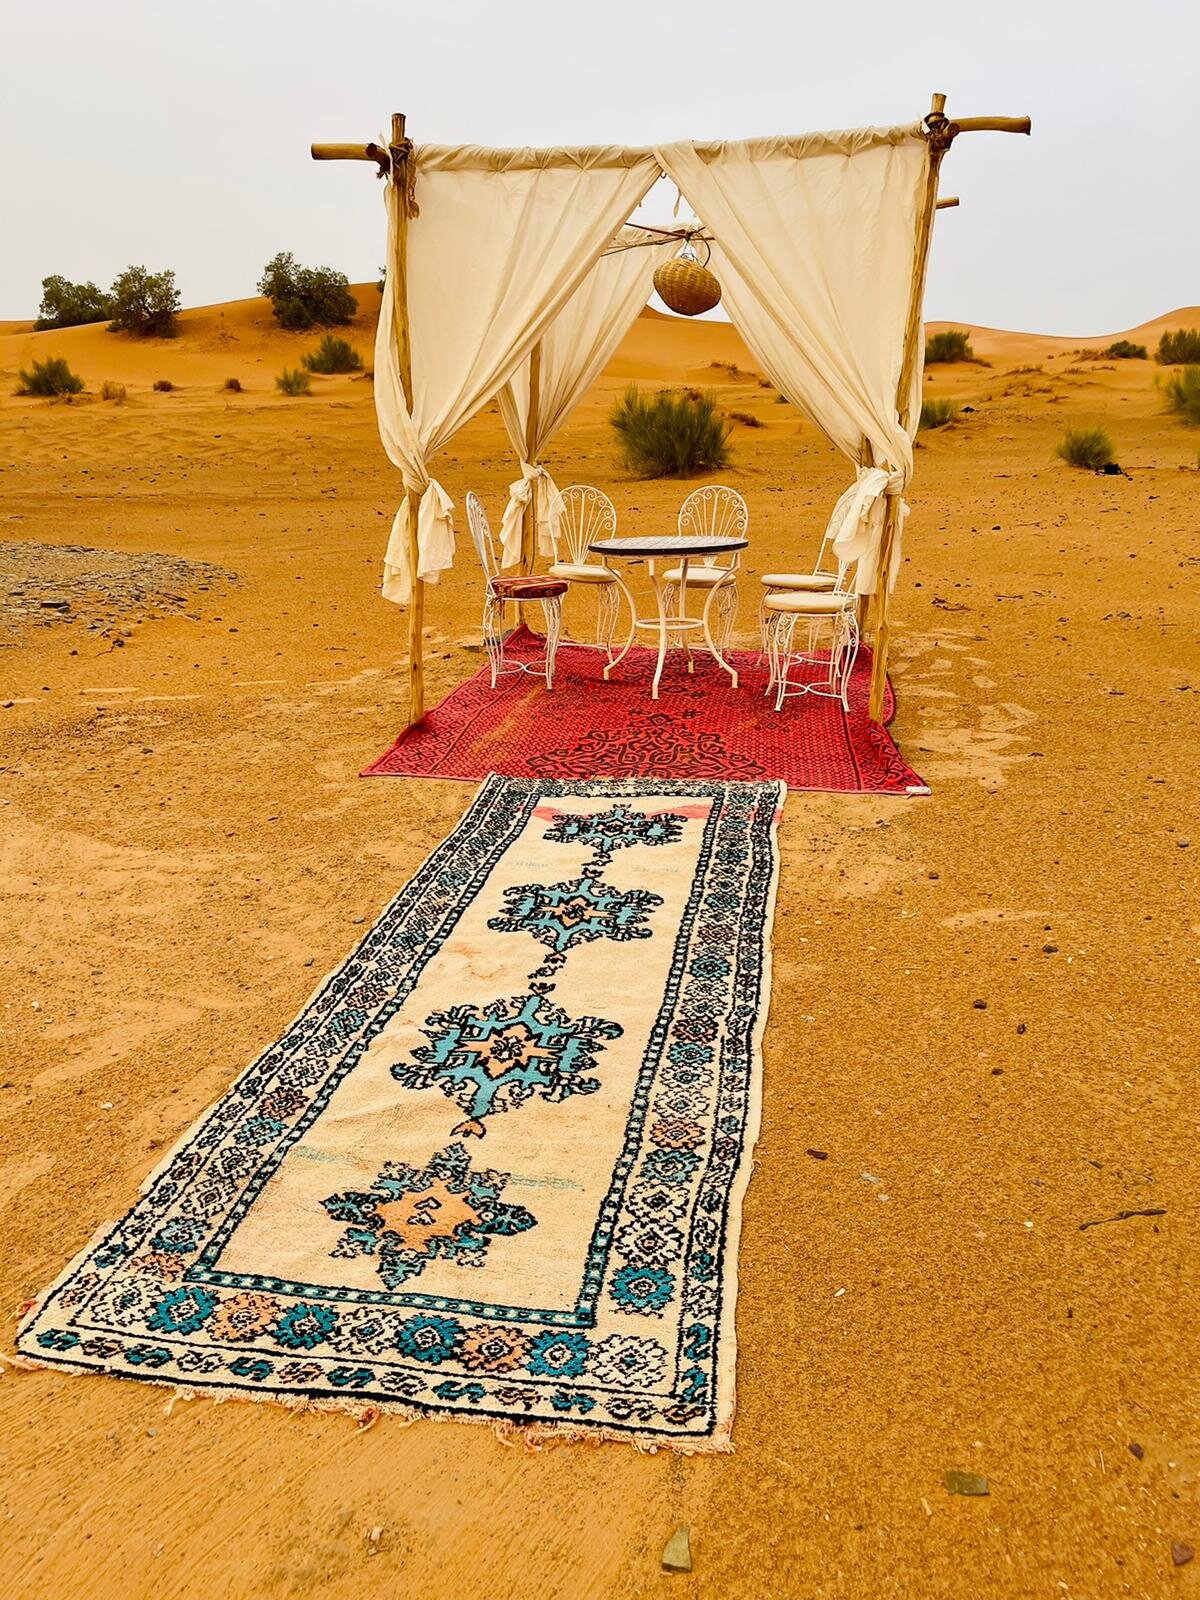 Kach Solo Travels in 2021 Berber-style luxurious Desert Camp in Merzouga, Morocco!30.jpg